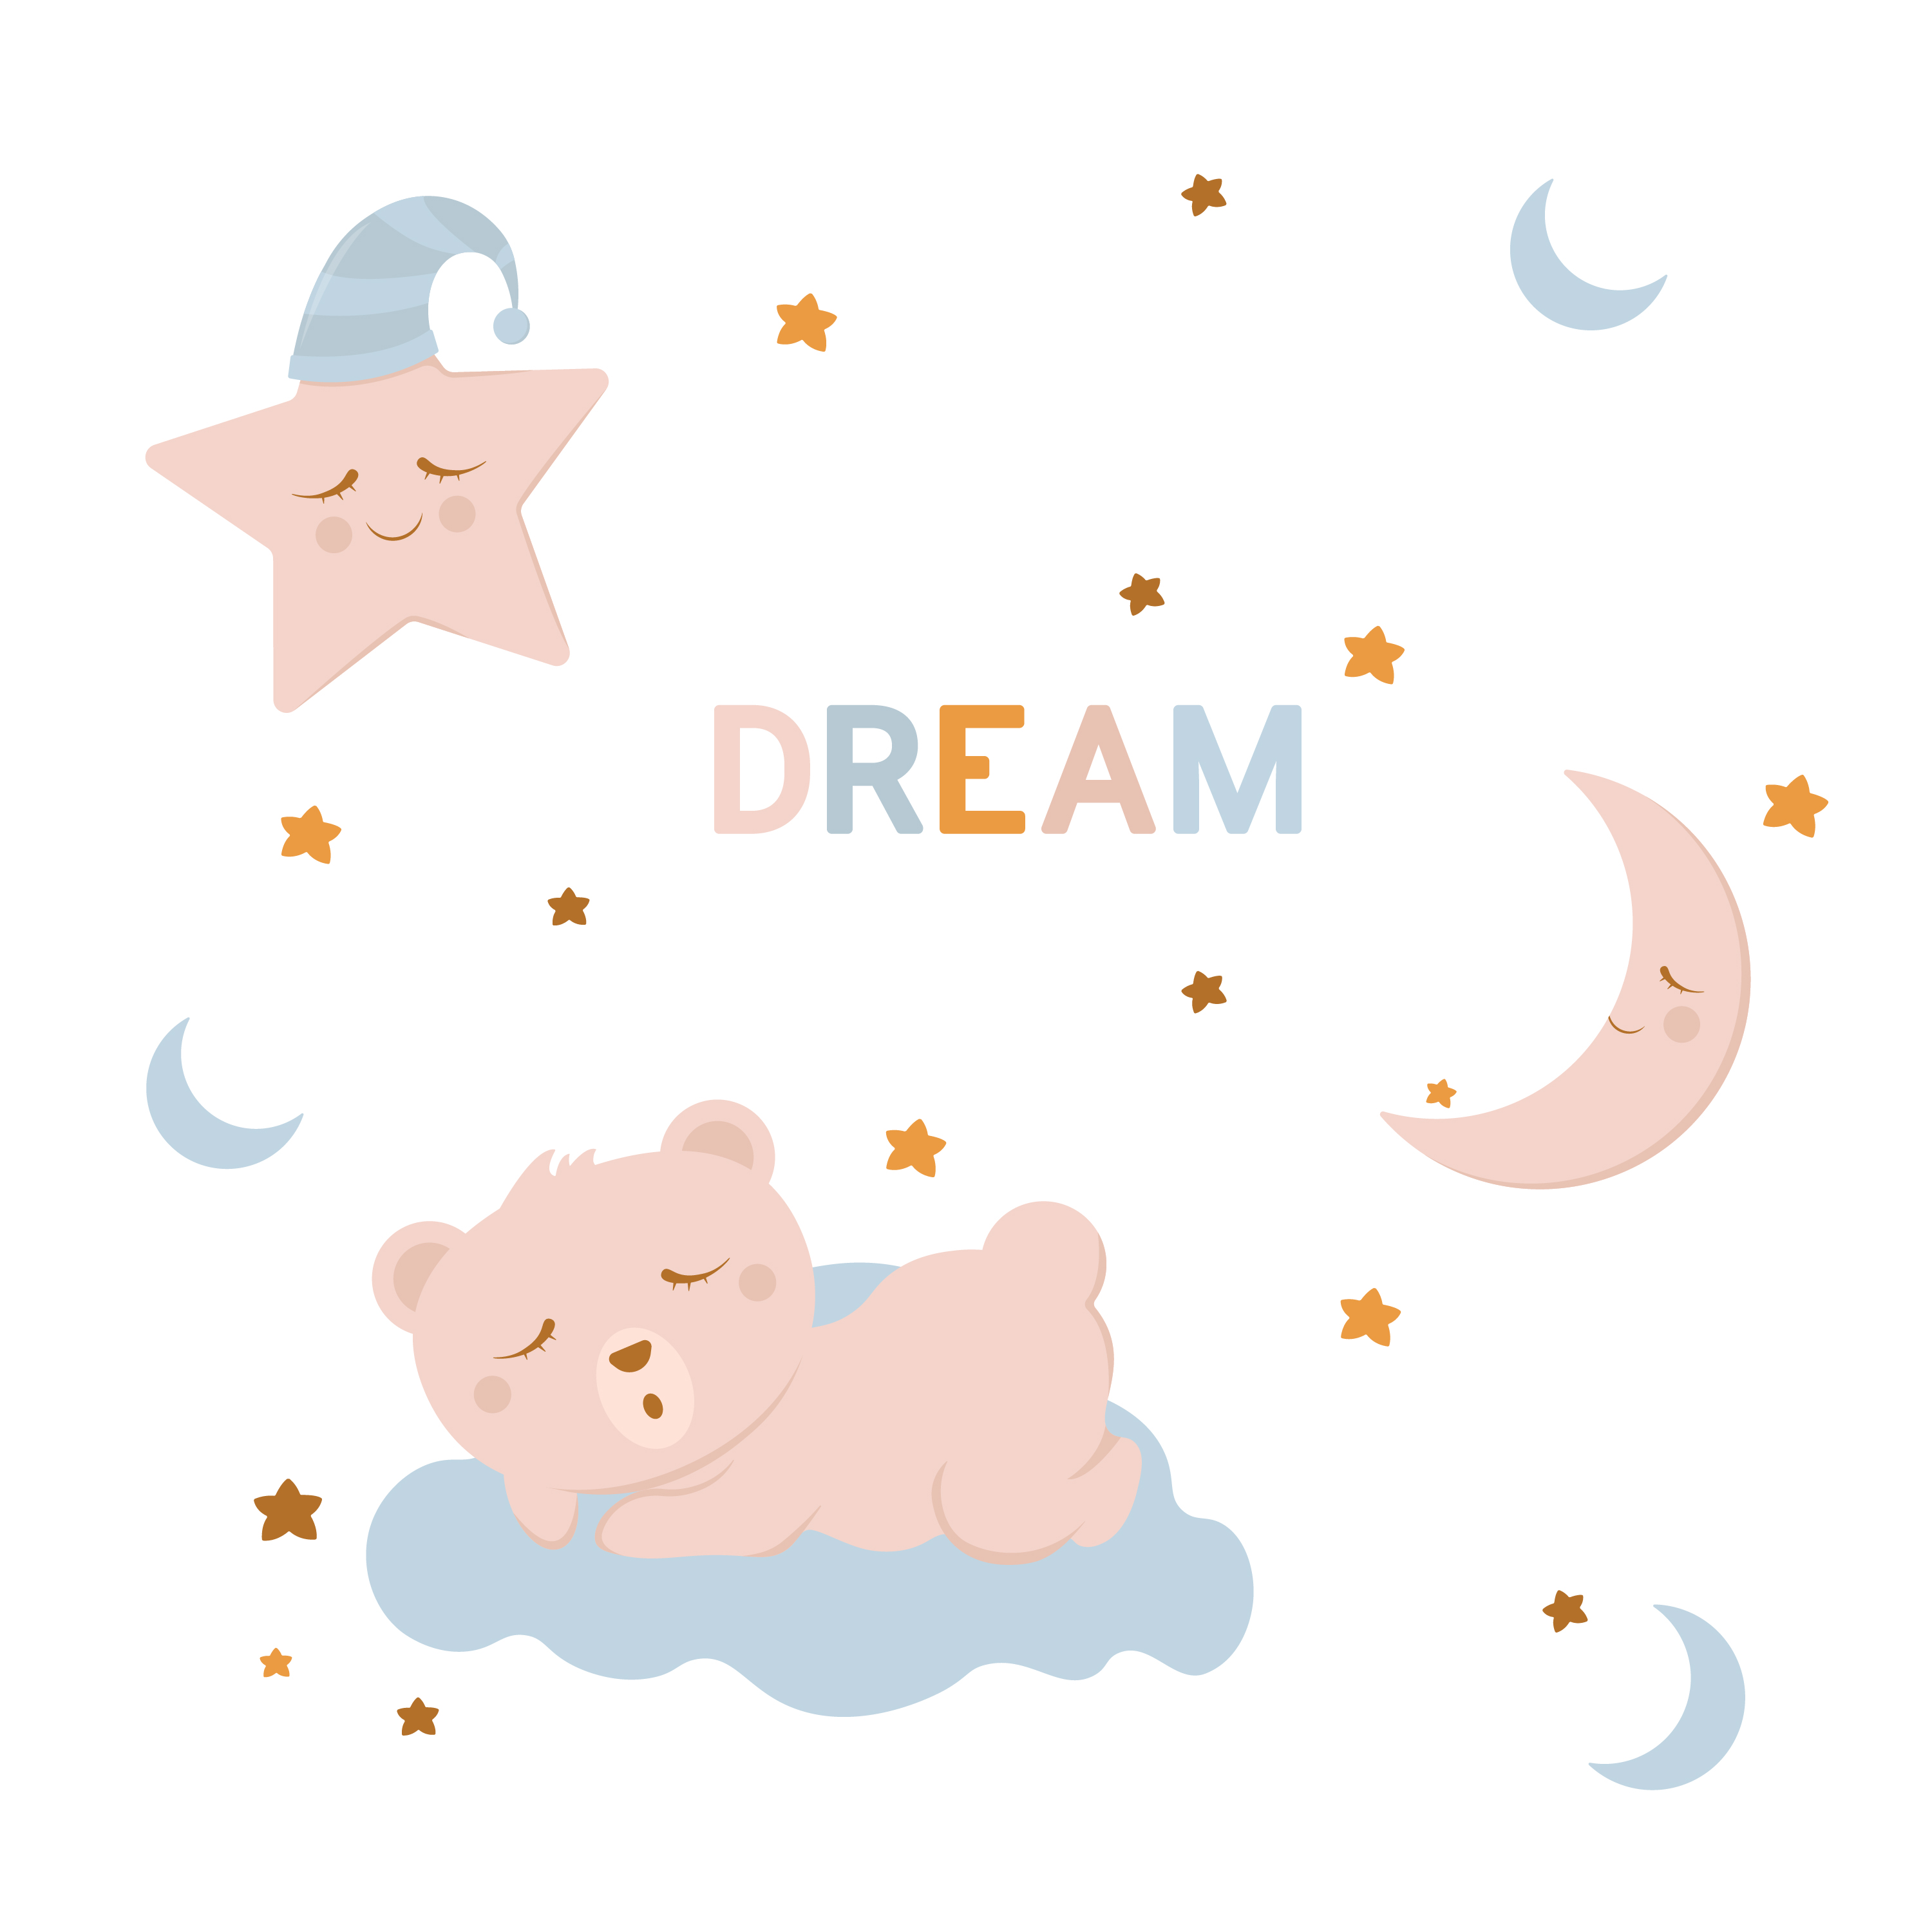 Children's illustration with cute sleeping bears, a moon and a star for a sweet dream preview image.